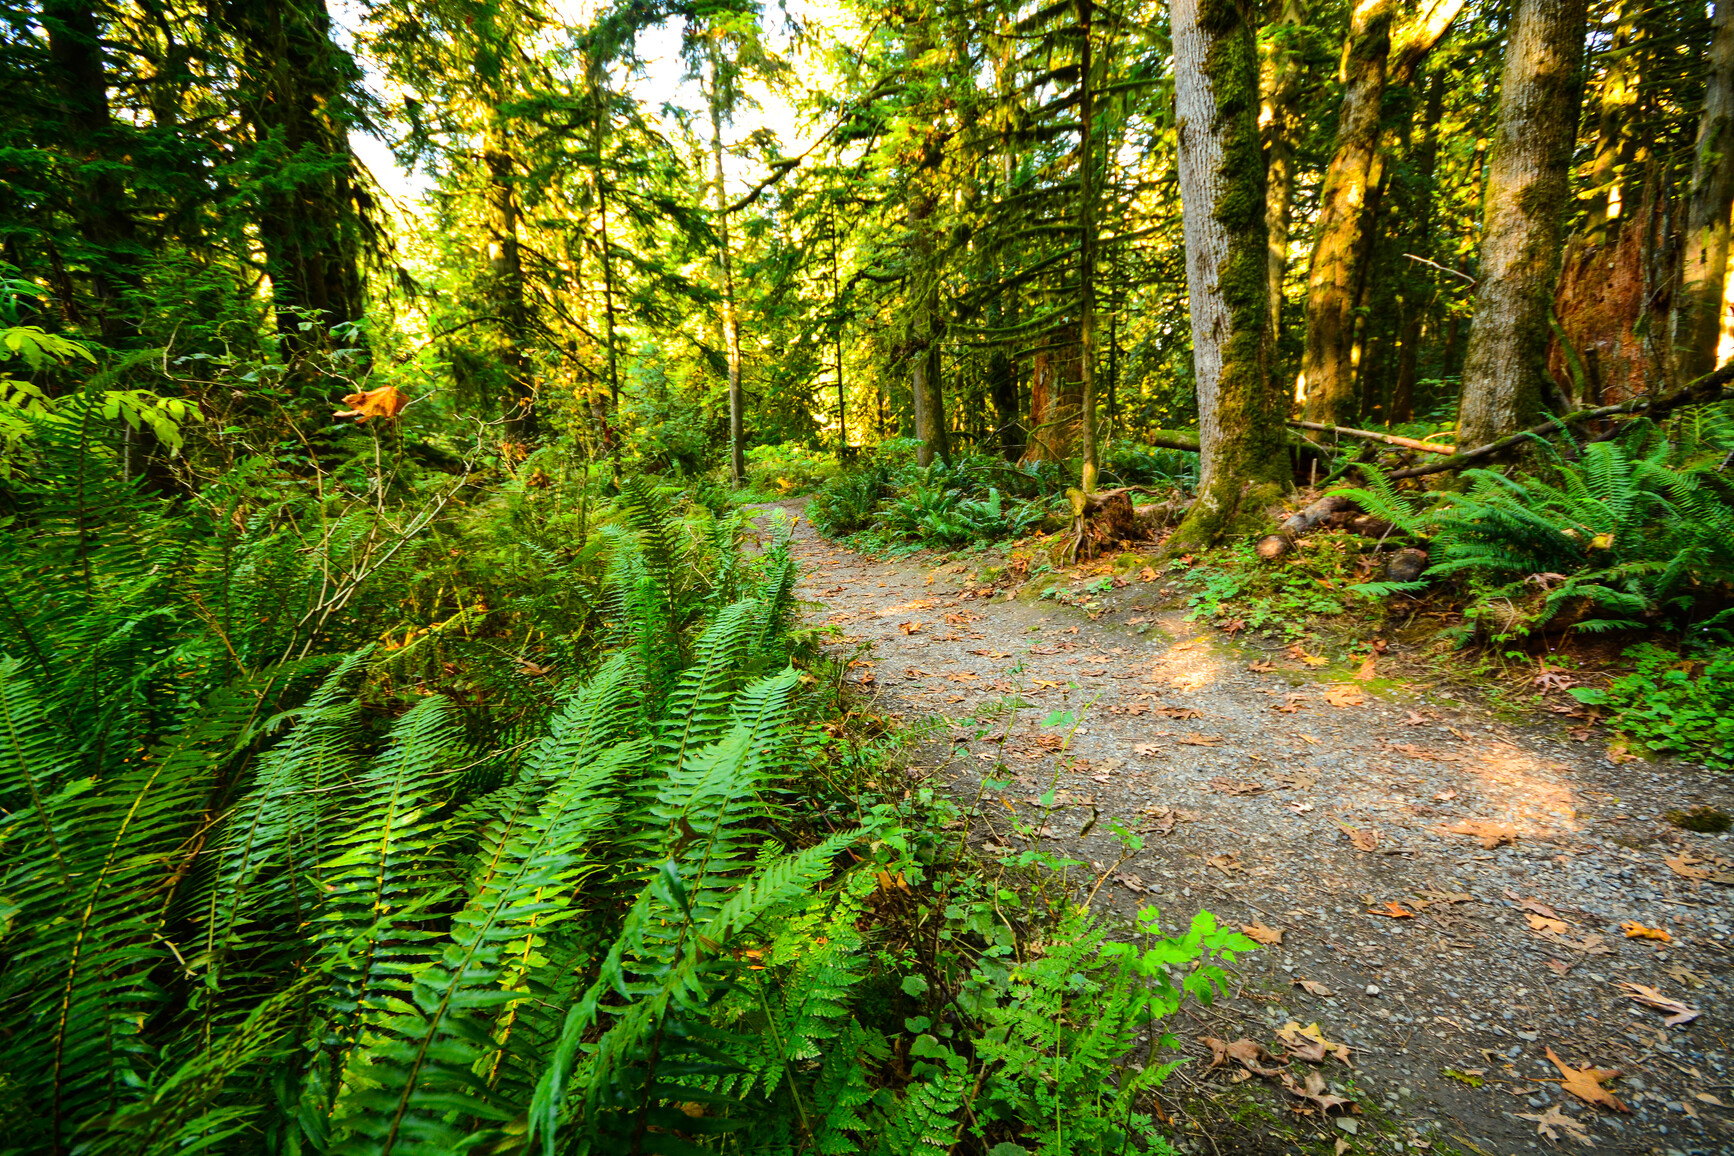 Trail through the forest. Ferns and moss covered trees line the trail.